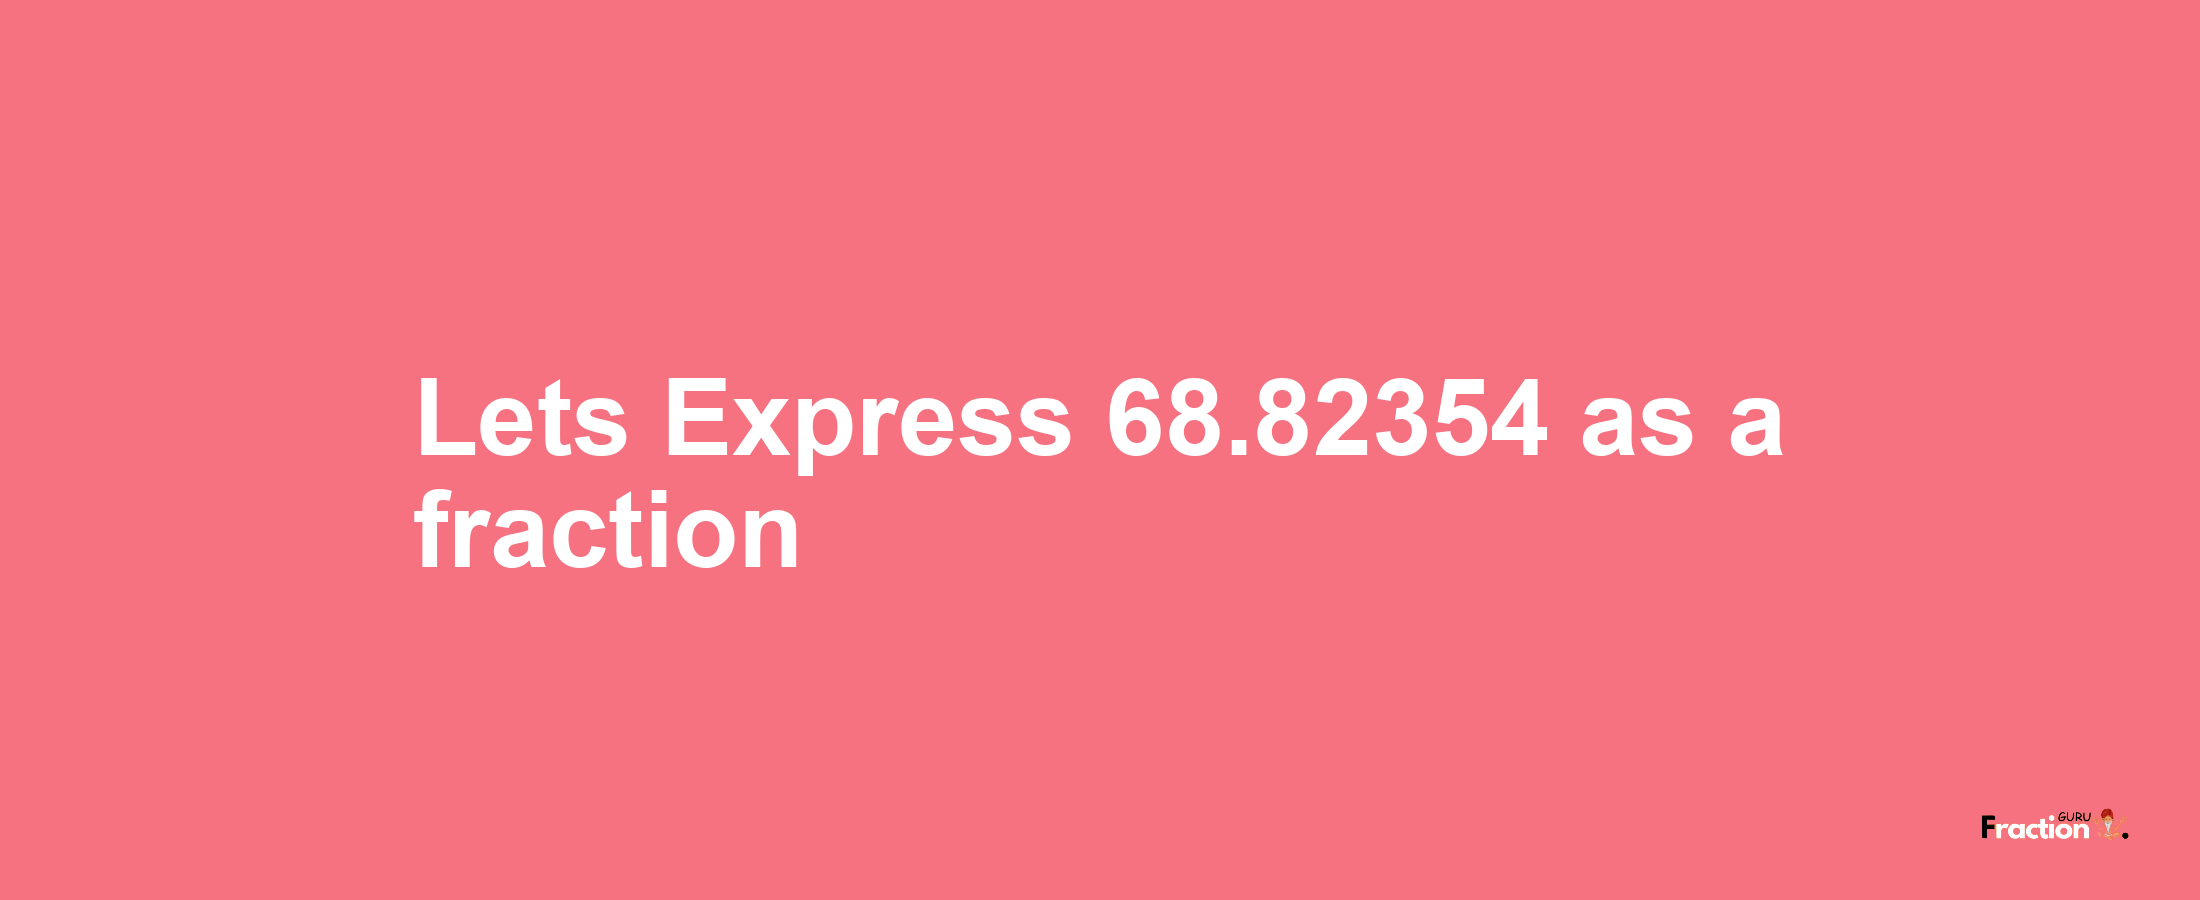 Lets Express 68.82354 as afraction